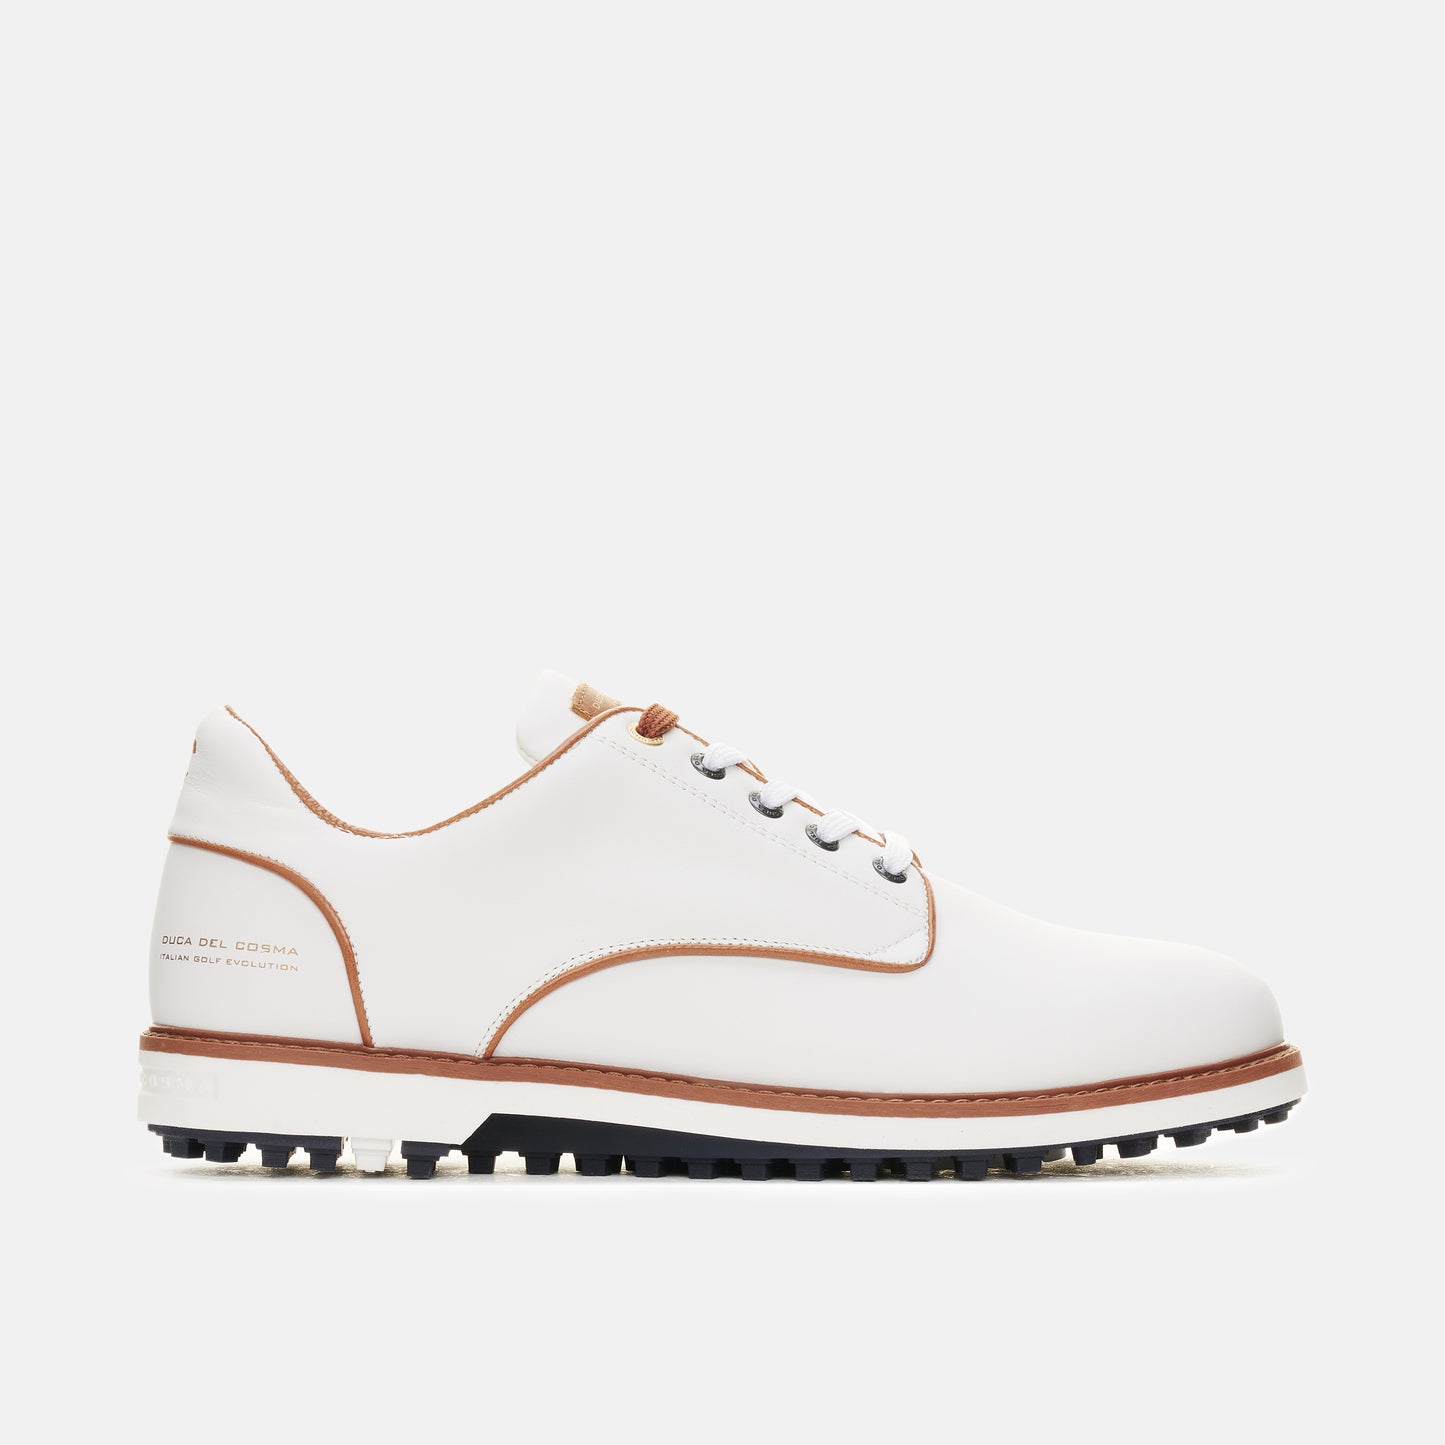 Elpaso white golf shoes for men's from duca del cosma 